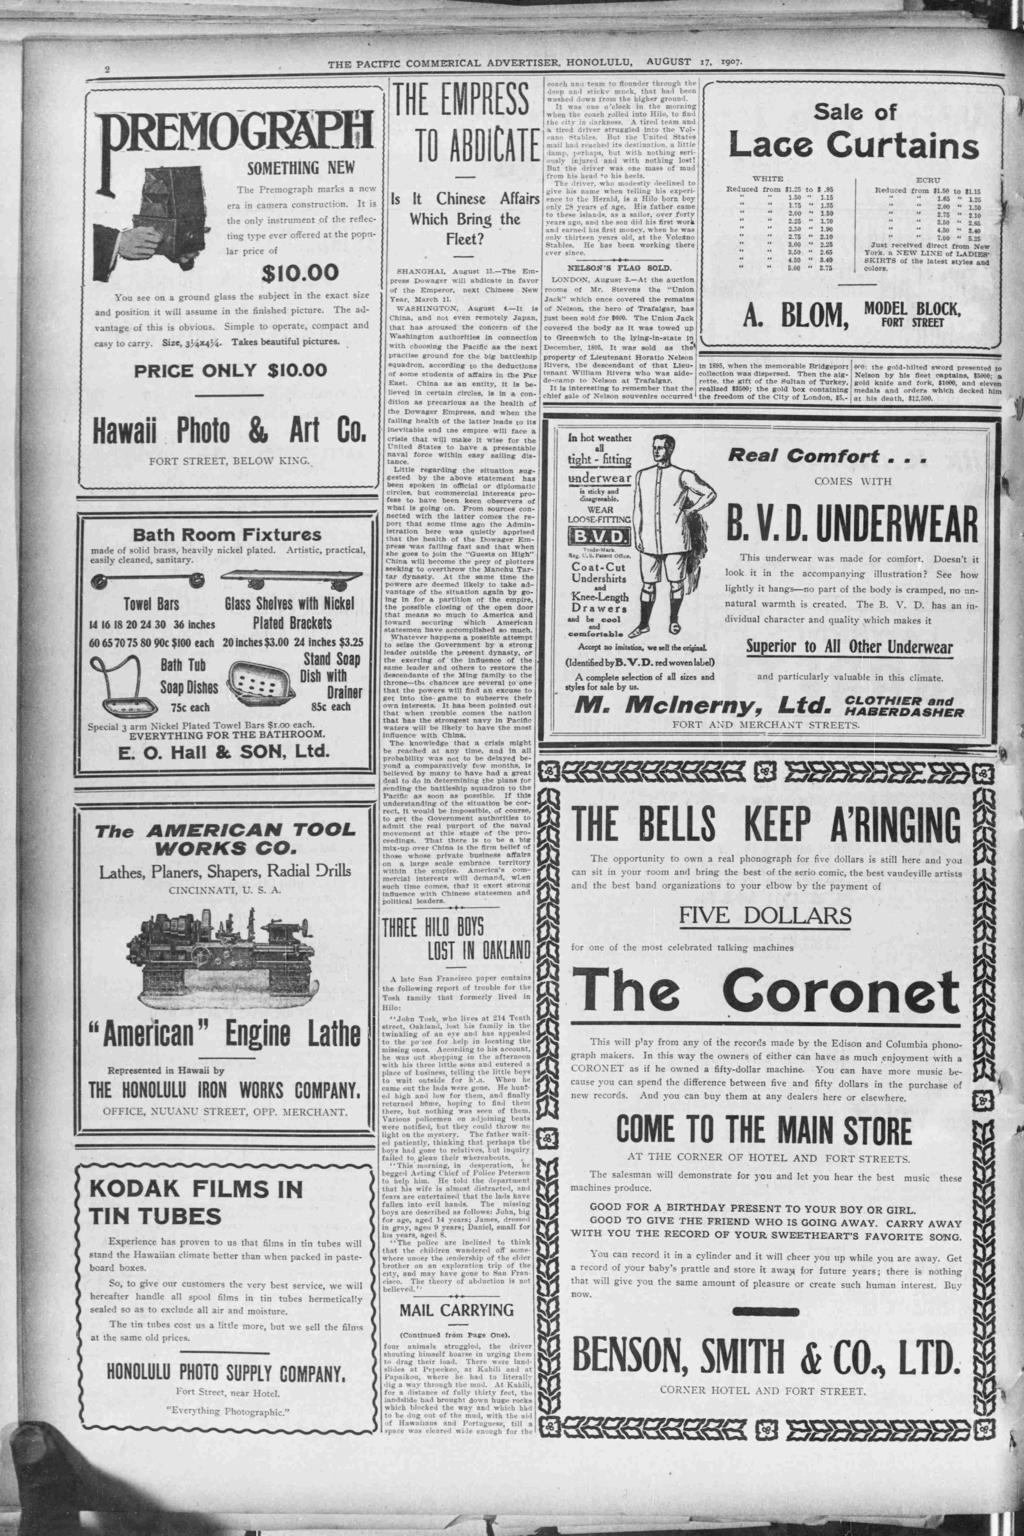 THE PACFC COMMERCAL ADVERTSER, HONOLULU, AUGUST 7, SOMETHNG NEW THE EMPRESS eoach team to founder through the deep stekv muck, that had been washed down from the hgher ground t was one oclock n the